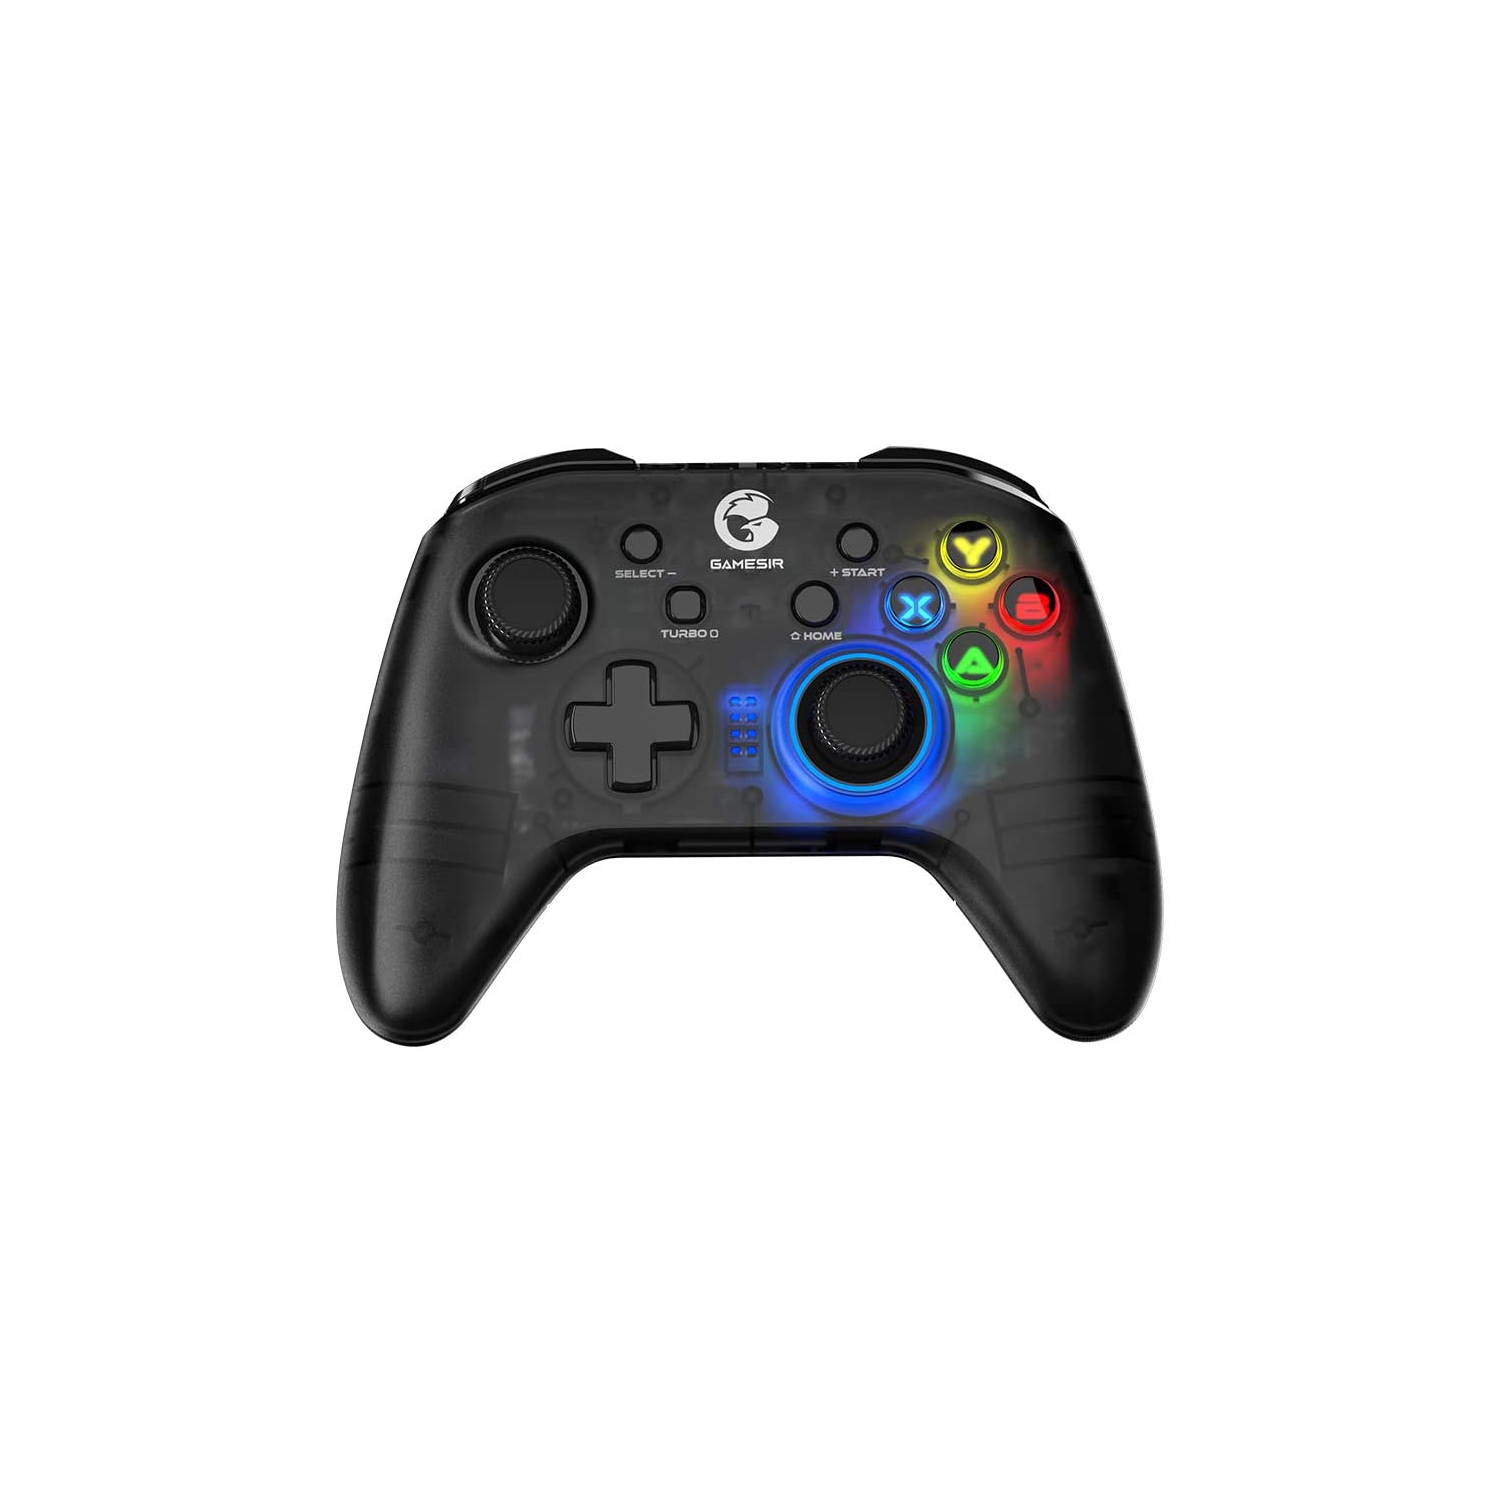 GameSir T4 pro Wireless Game Controller for Windows 7 8 10 PC/iPhone/Android/Switch - Open Box